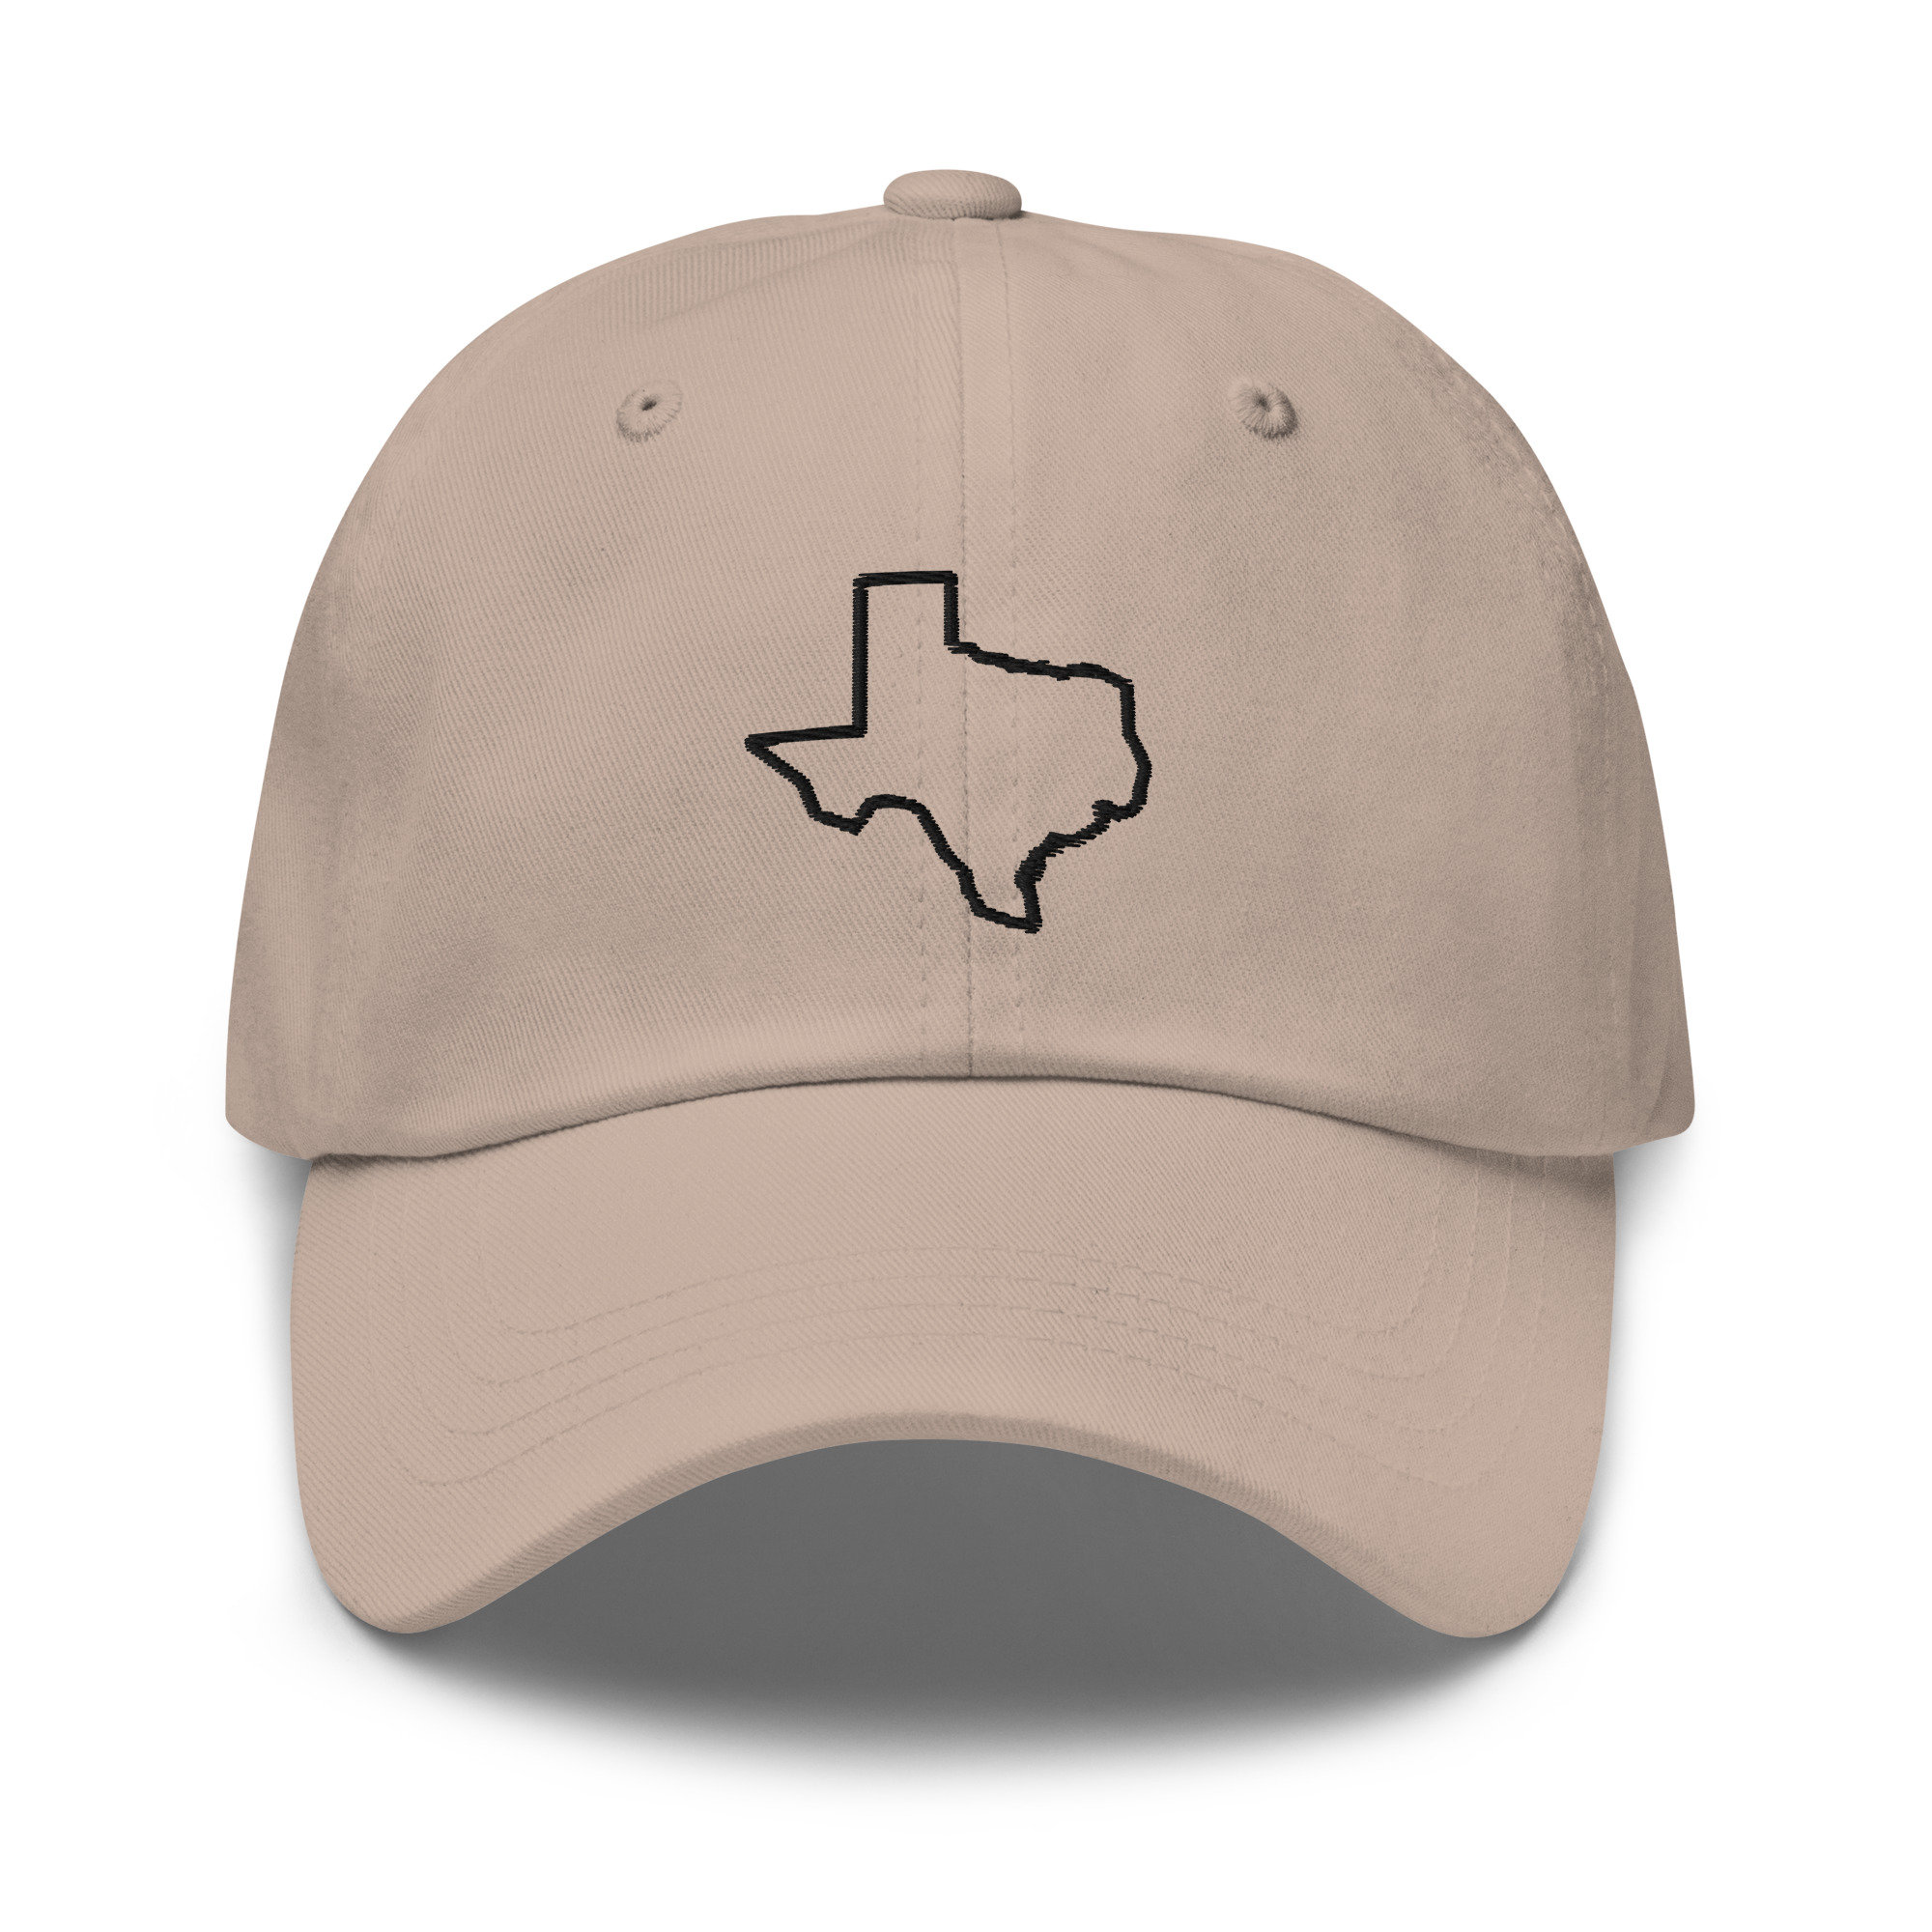 Texas gifts for dad